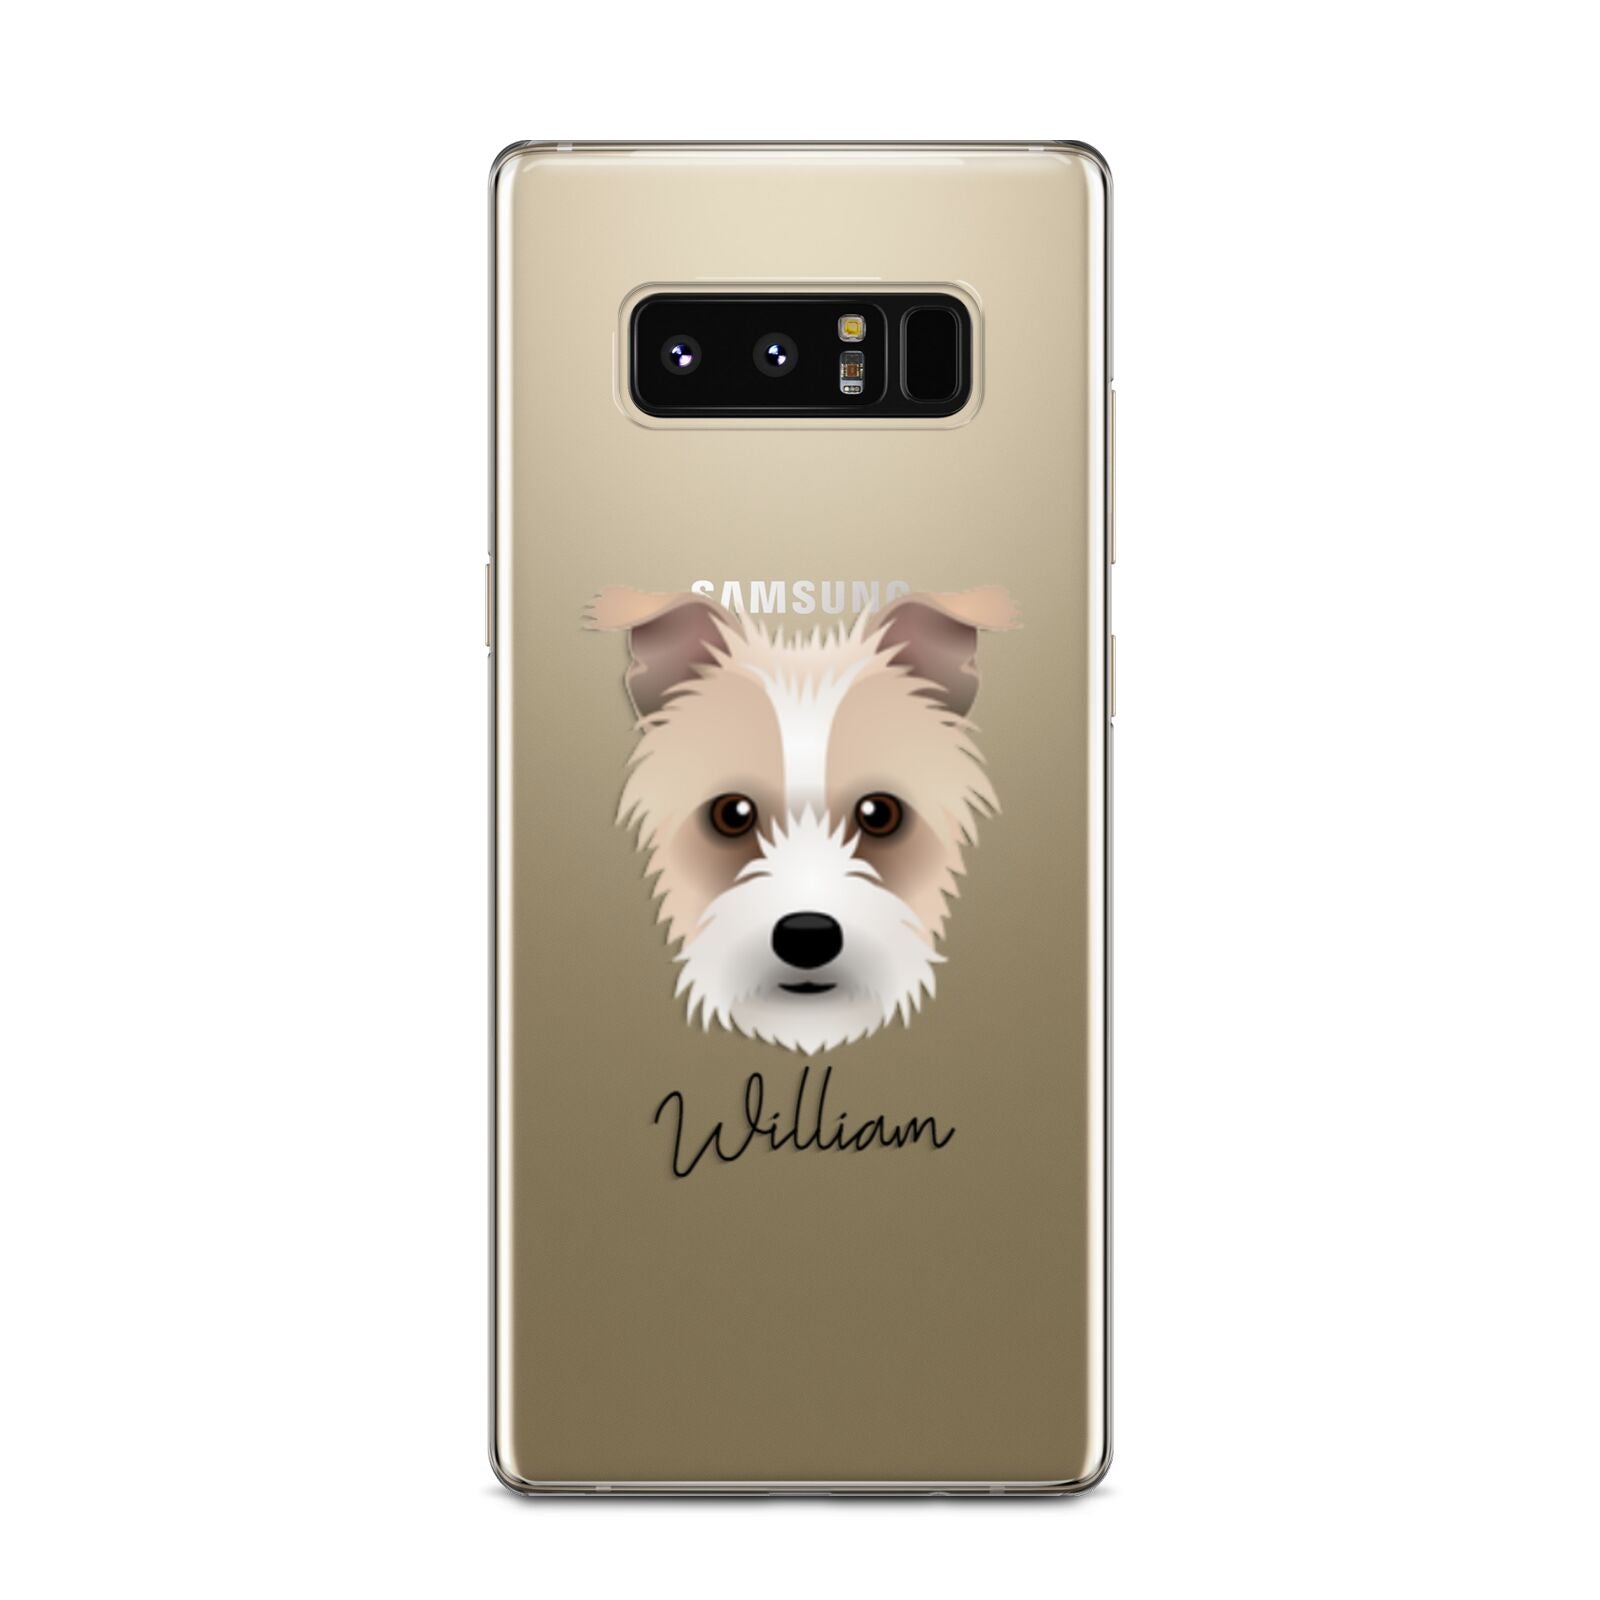 Sporting Lucas Terrier Personalised Samsung Galaxy Note 8 Case